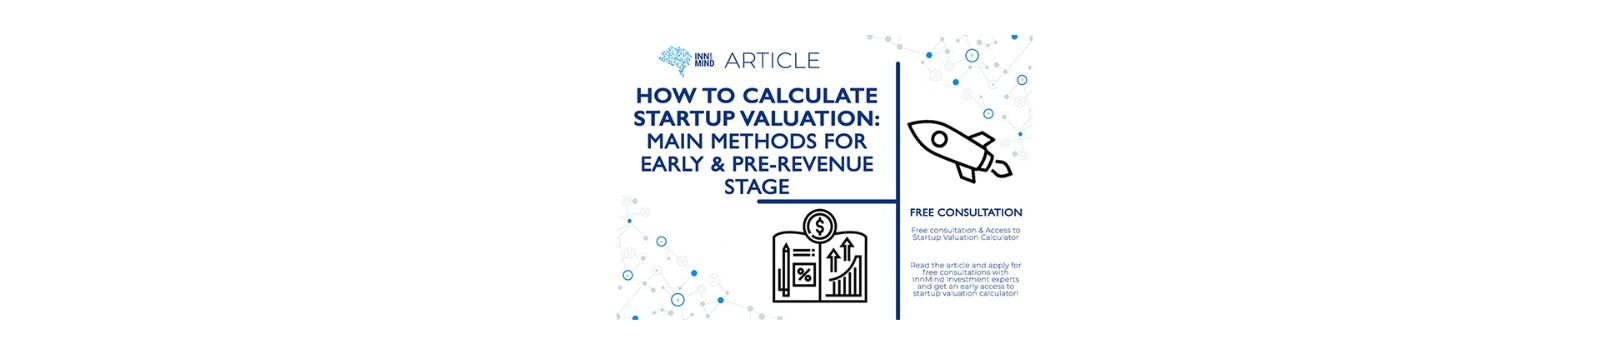 How to calculate startup valuation: principal methods for early & pre-revenue stage